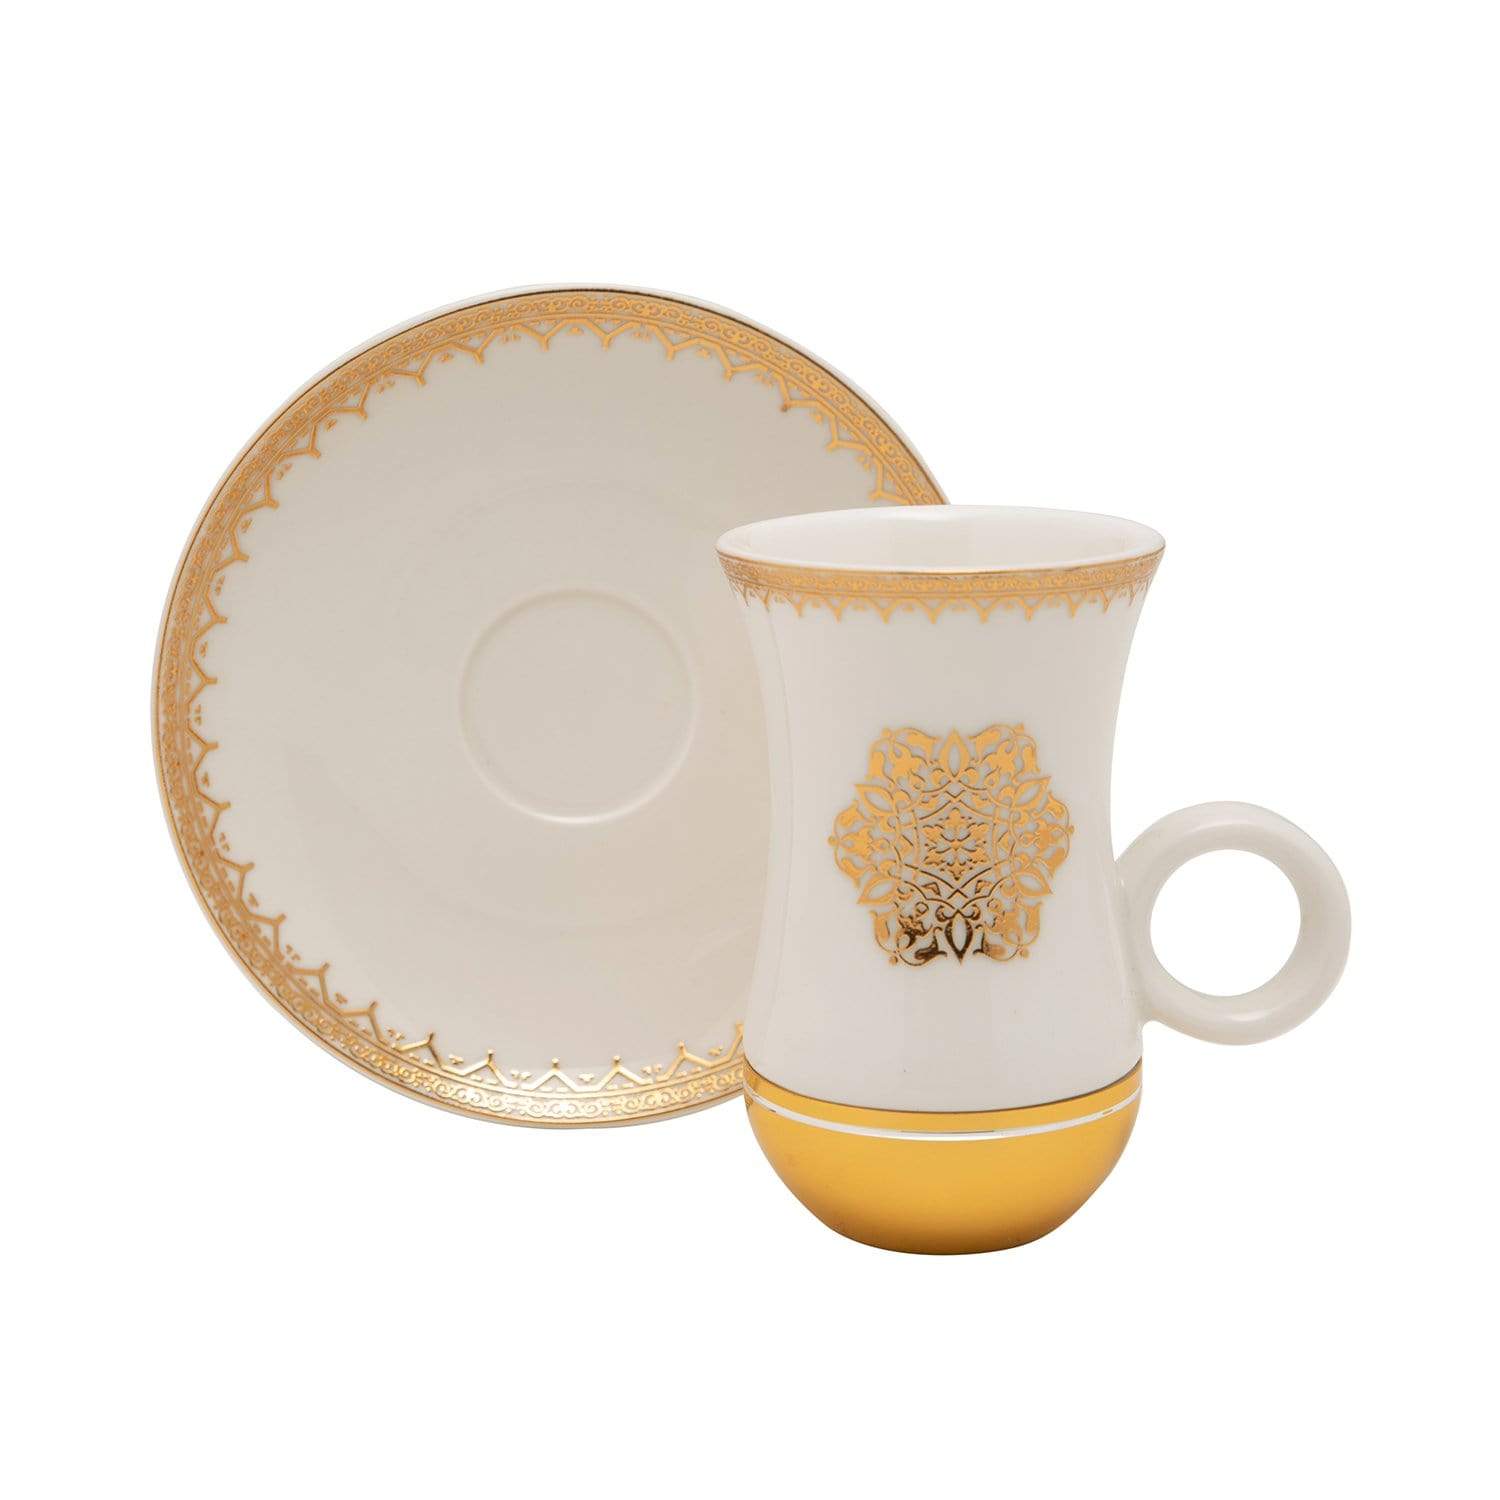 Amber Porcelain Larisa Istikan Cup Set - Gold and White, 12 Pieces - AM3373-S28/026/12PC